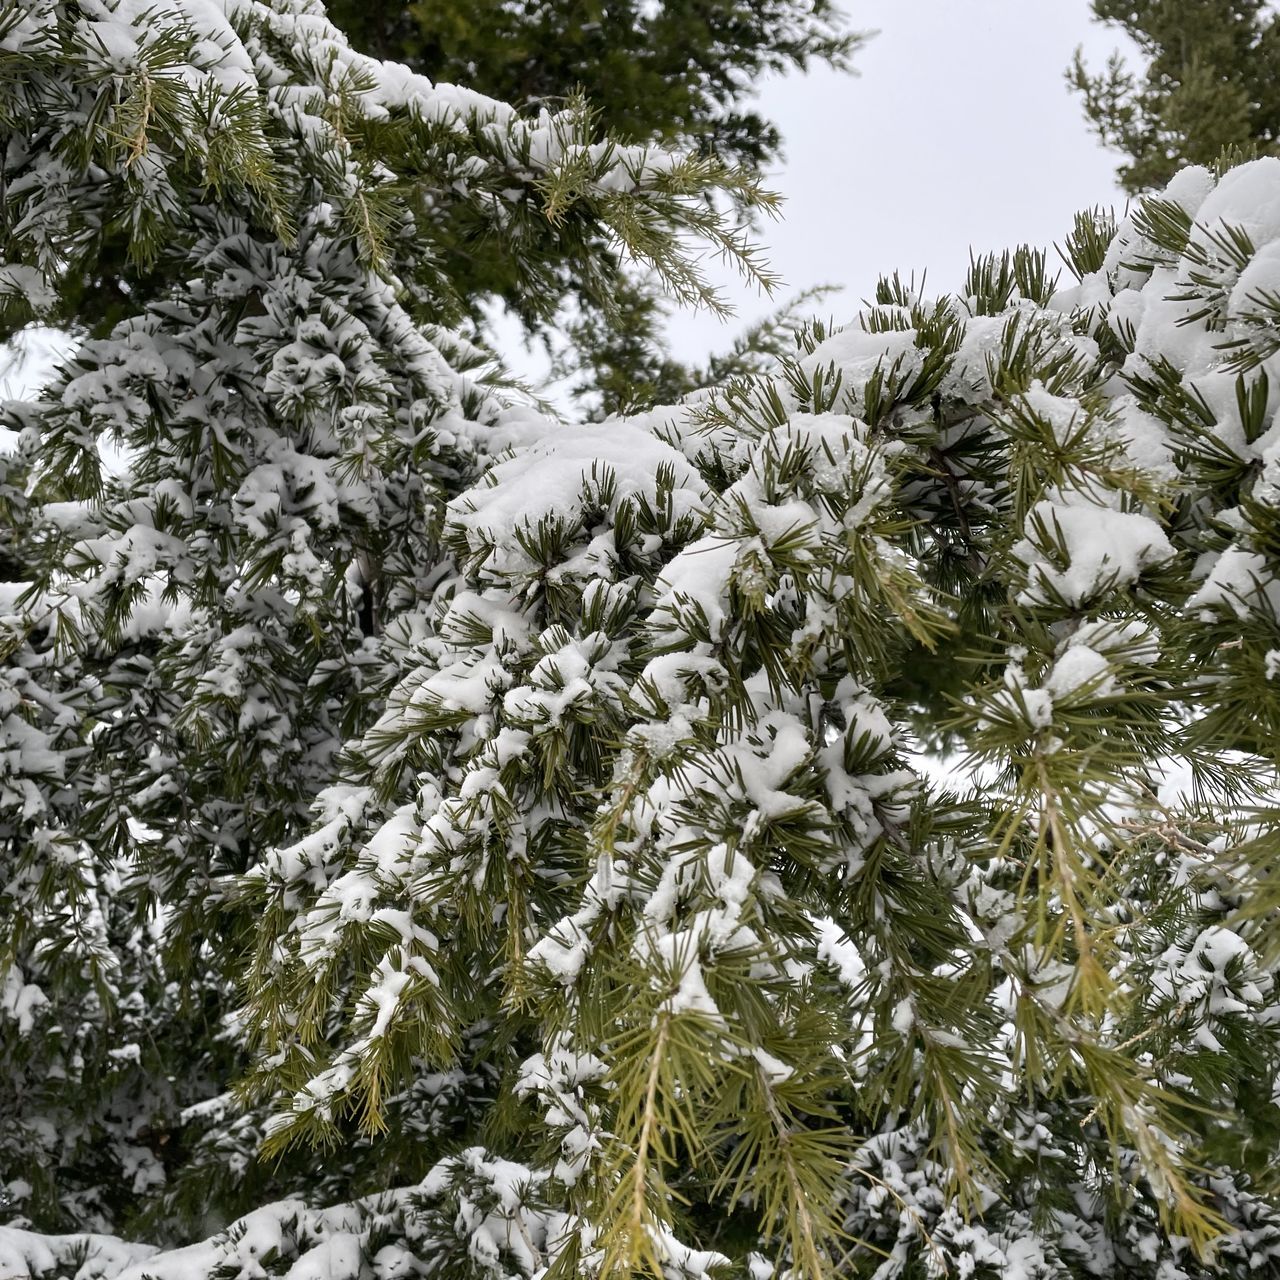 plant, tree, snow, cold temperature, winter, branch, beauty in nature, nature, coniferous tree, growth, pine tree, pinaceae, no people, fir, spruce, day, forest, frozen, land, low angle view, white, leaf, tranquility, flower, environment, frost, scenics - nature, non-urban scene, evergreen, sky, outdoors, pine woodland, freezing, evergreen tree, green, woodland